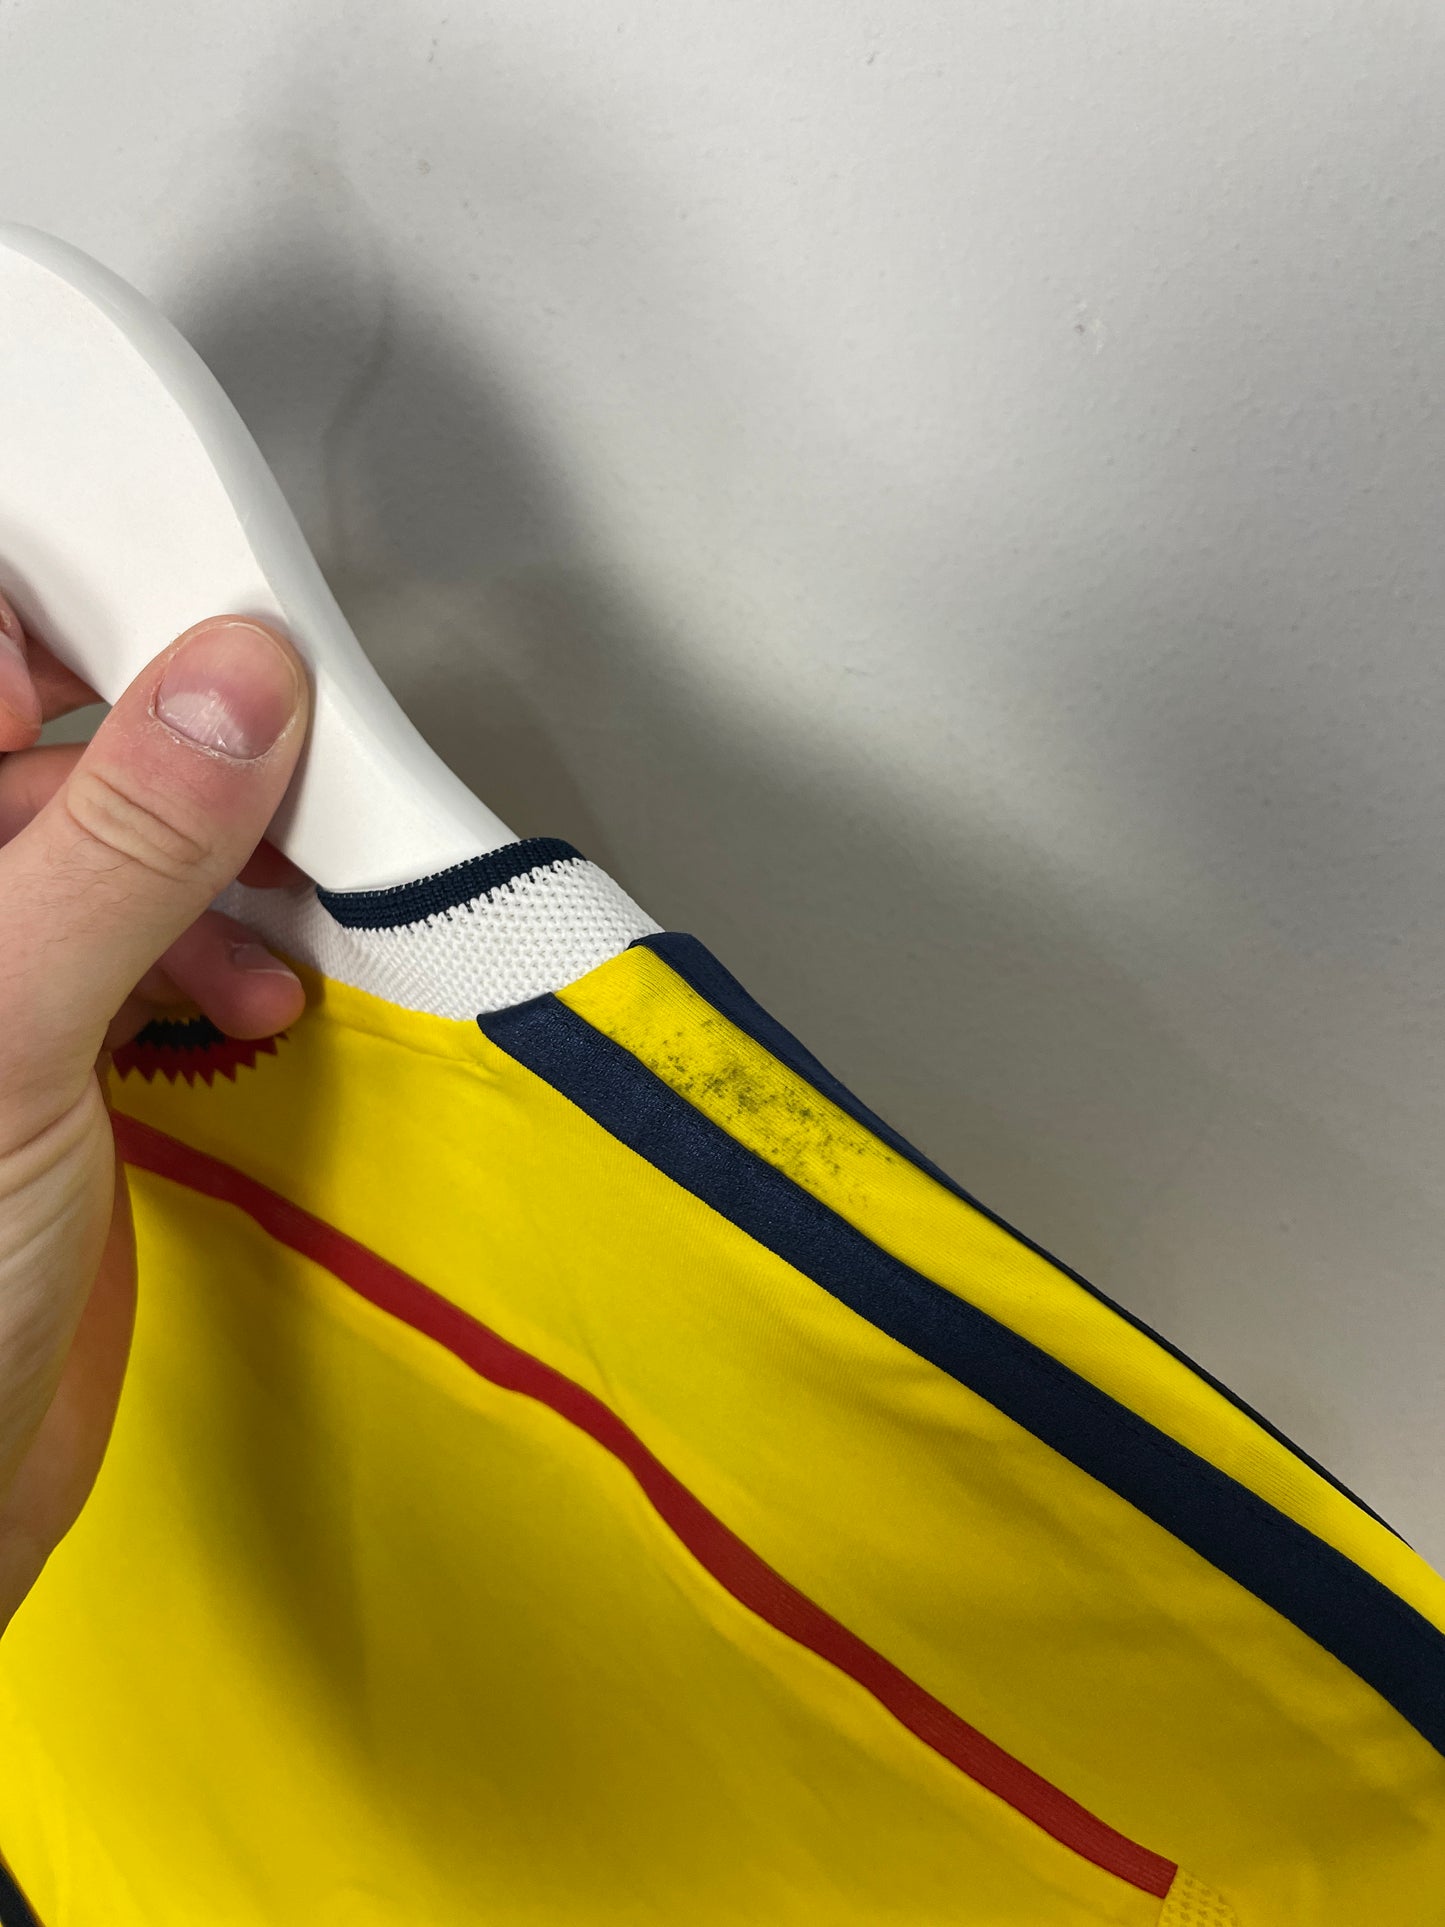 2014/15 COLOMBIA *PLAYER ISSUE* L/S HOME SHIRT (M) ADIDAS